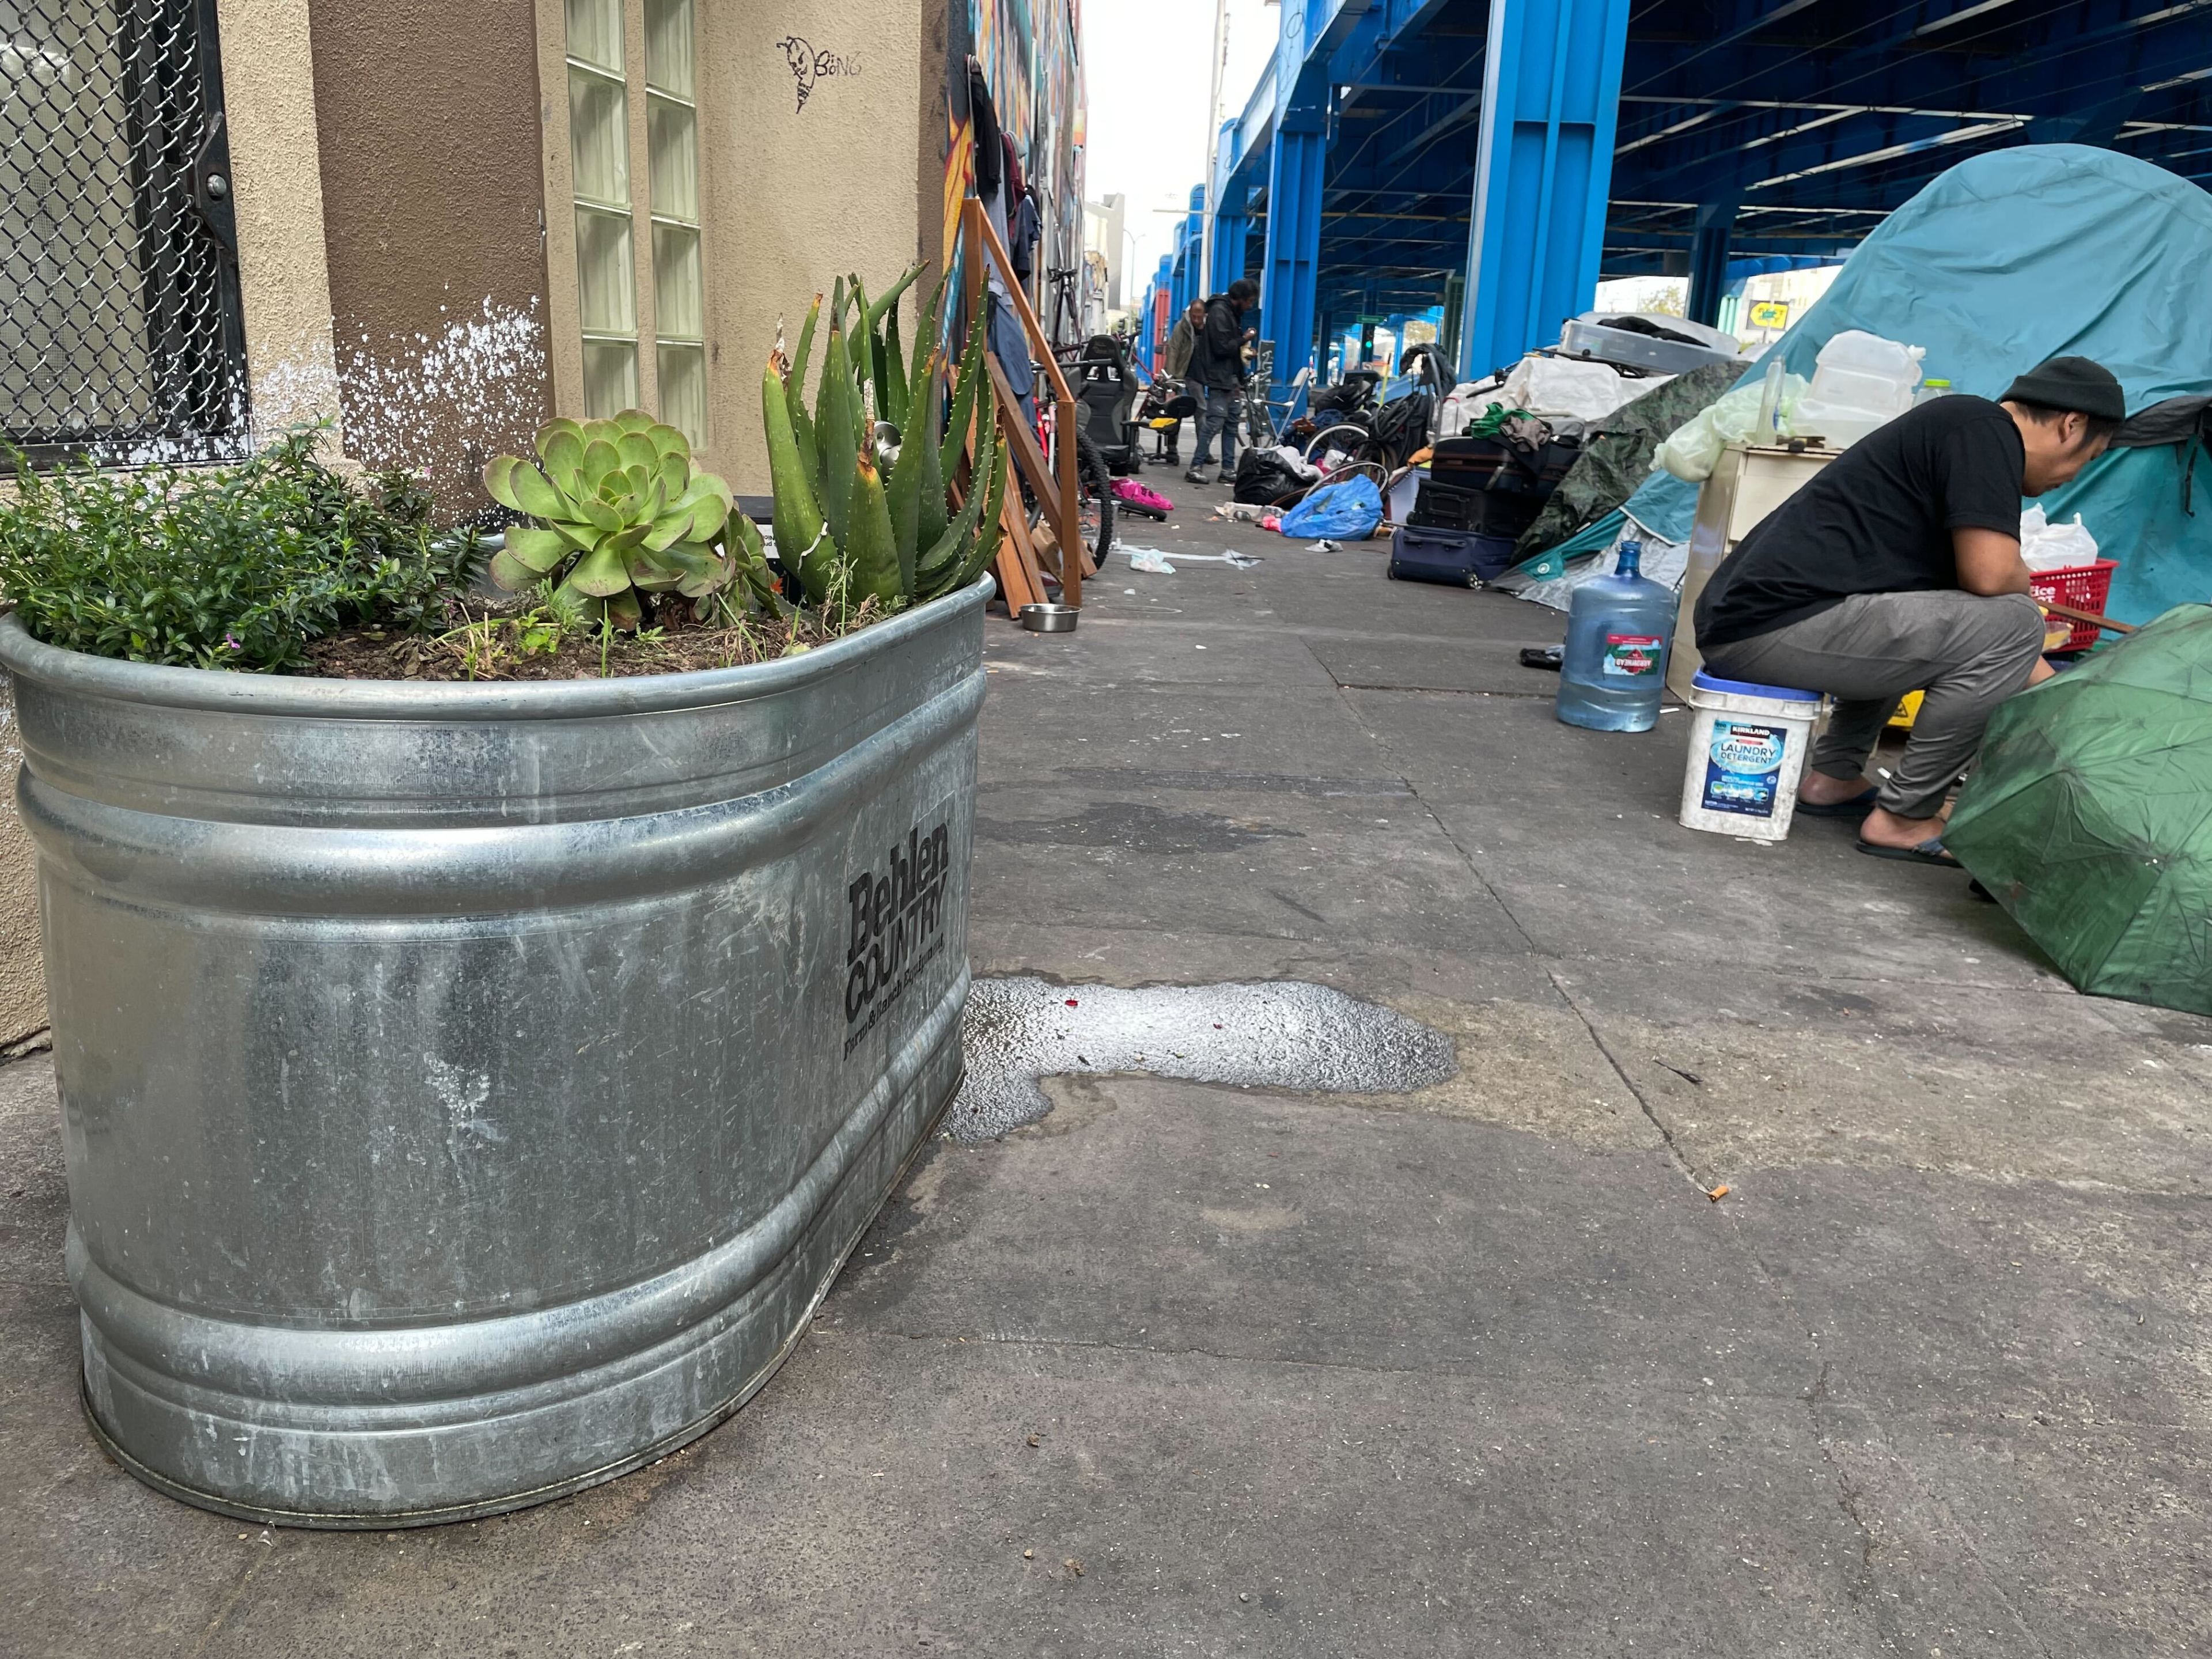 steel drums containing plants are seen on a sidewalk opposite tents